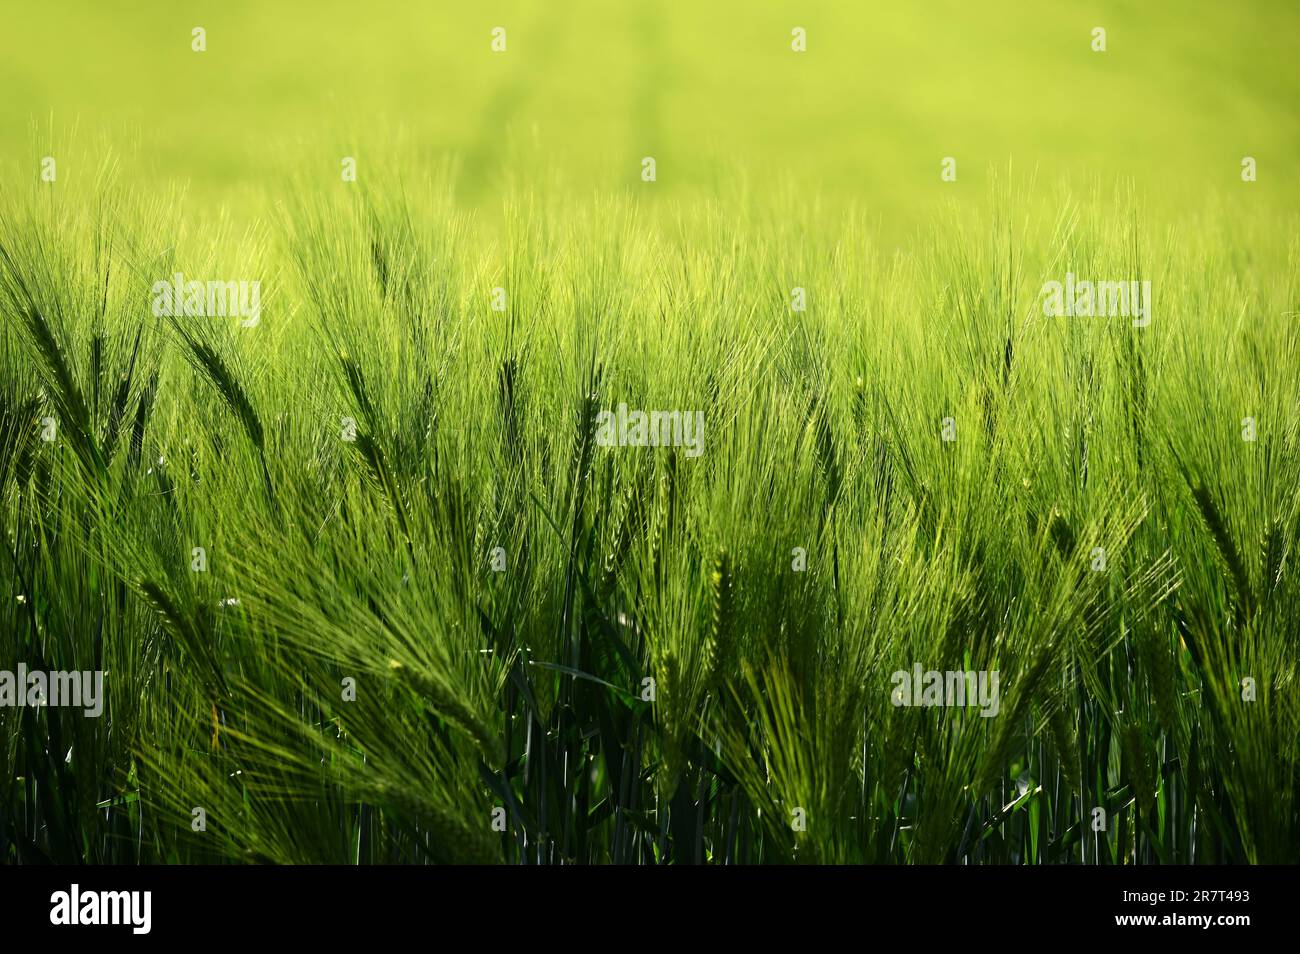 Beautiful fresh green grain on the field. Natural colorful background in summer sunny day. Stock Photo